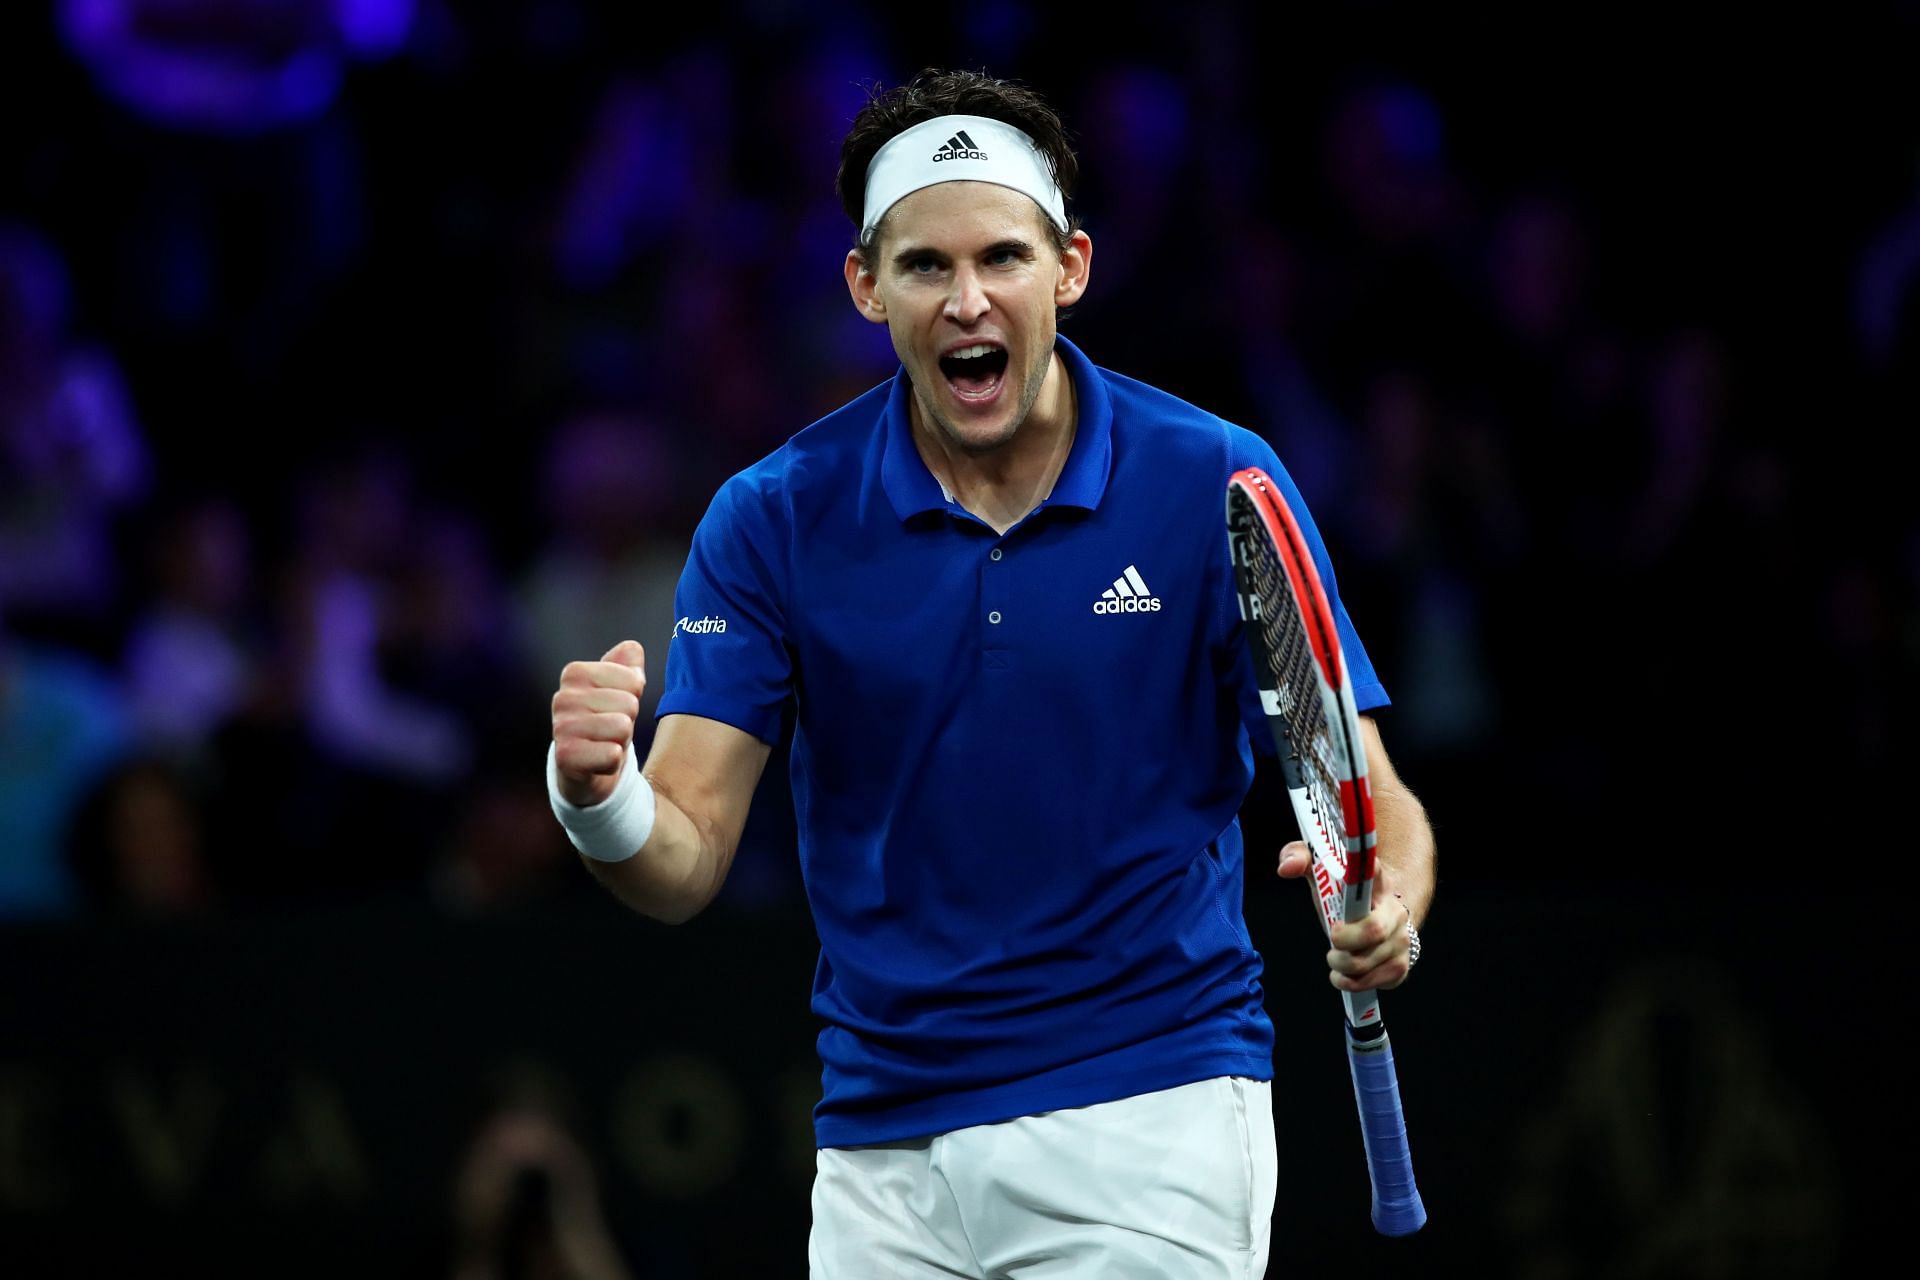 Dominic Thiem at the Laver Cup 2019